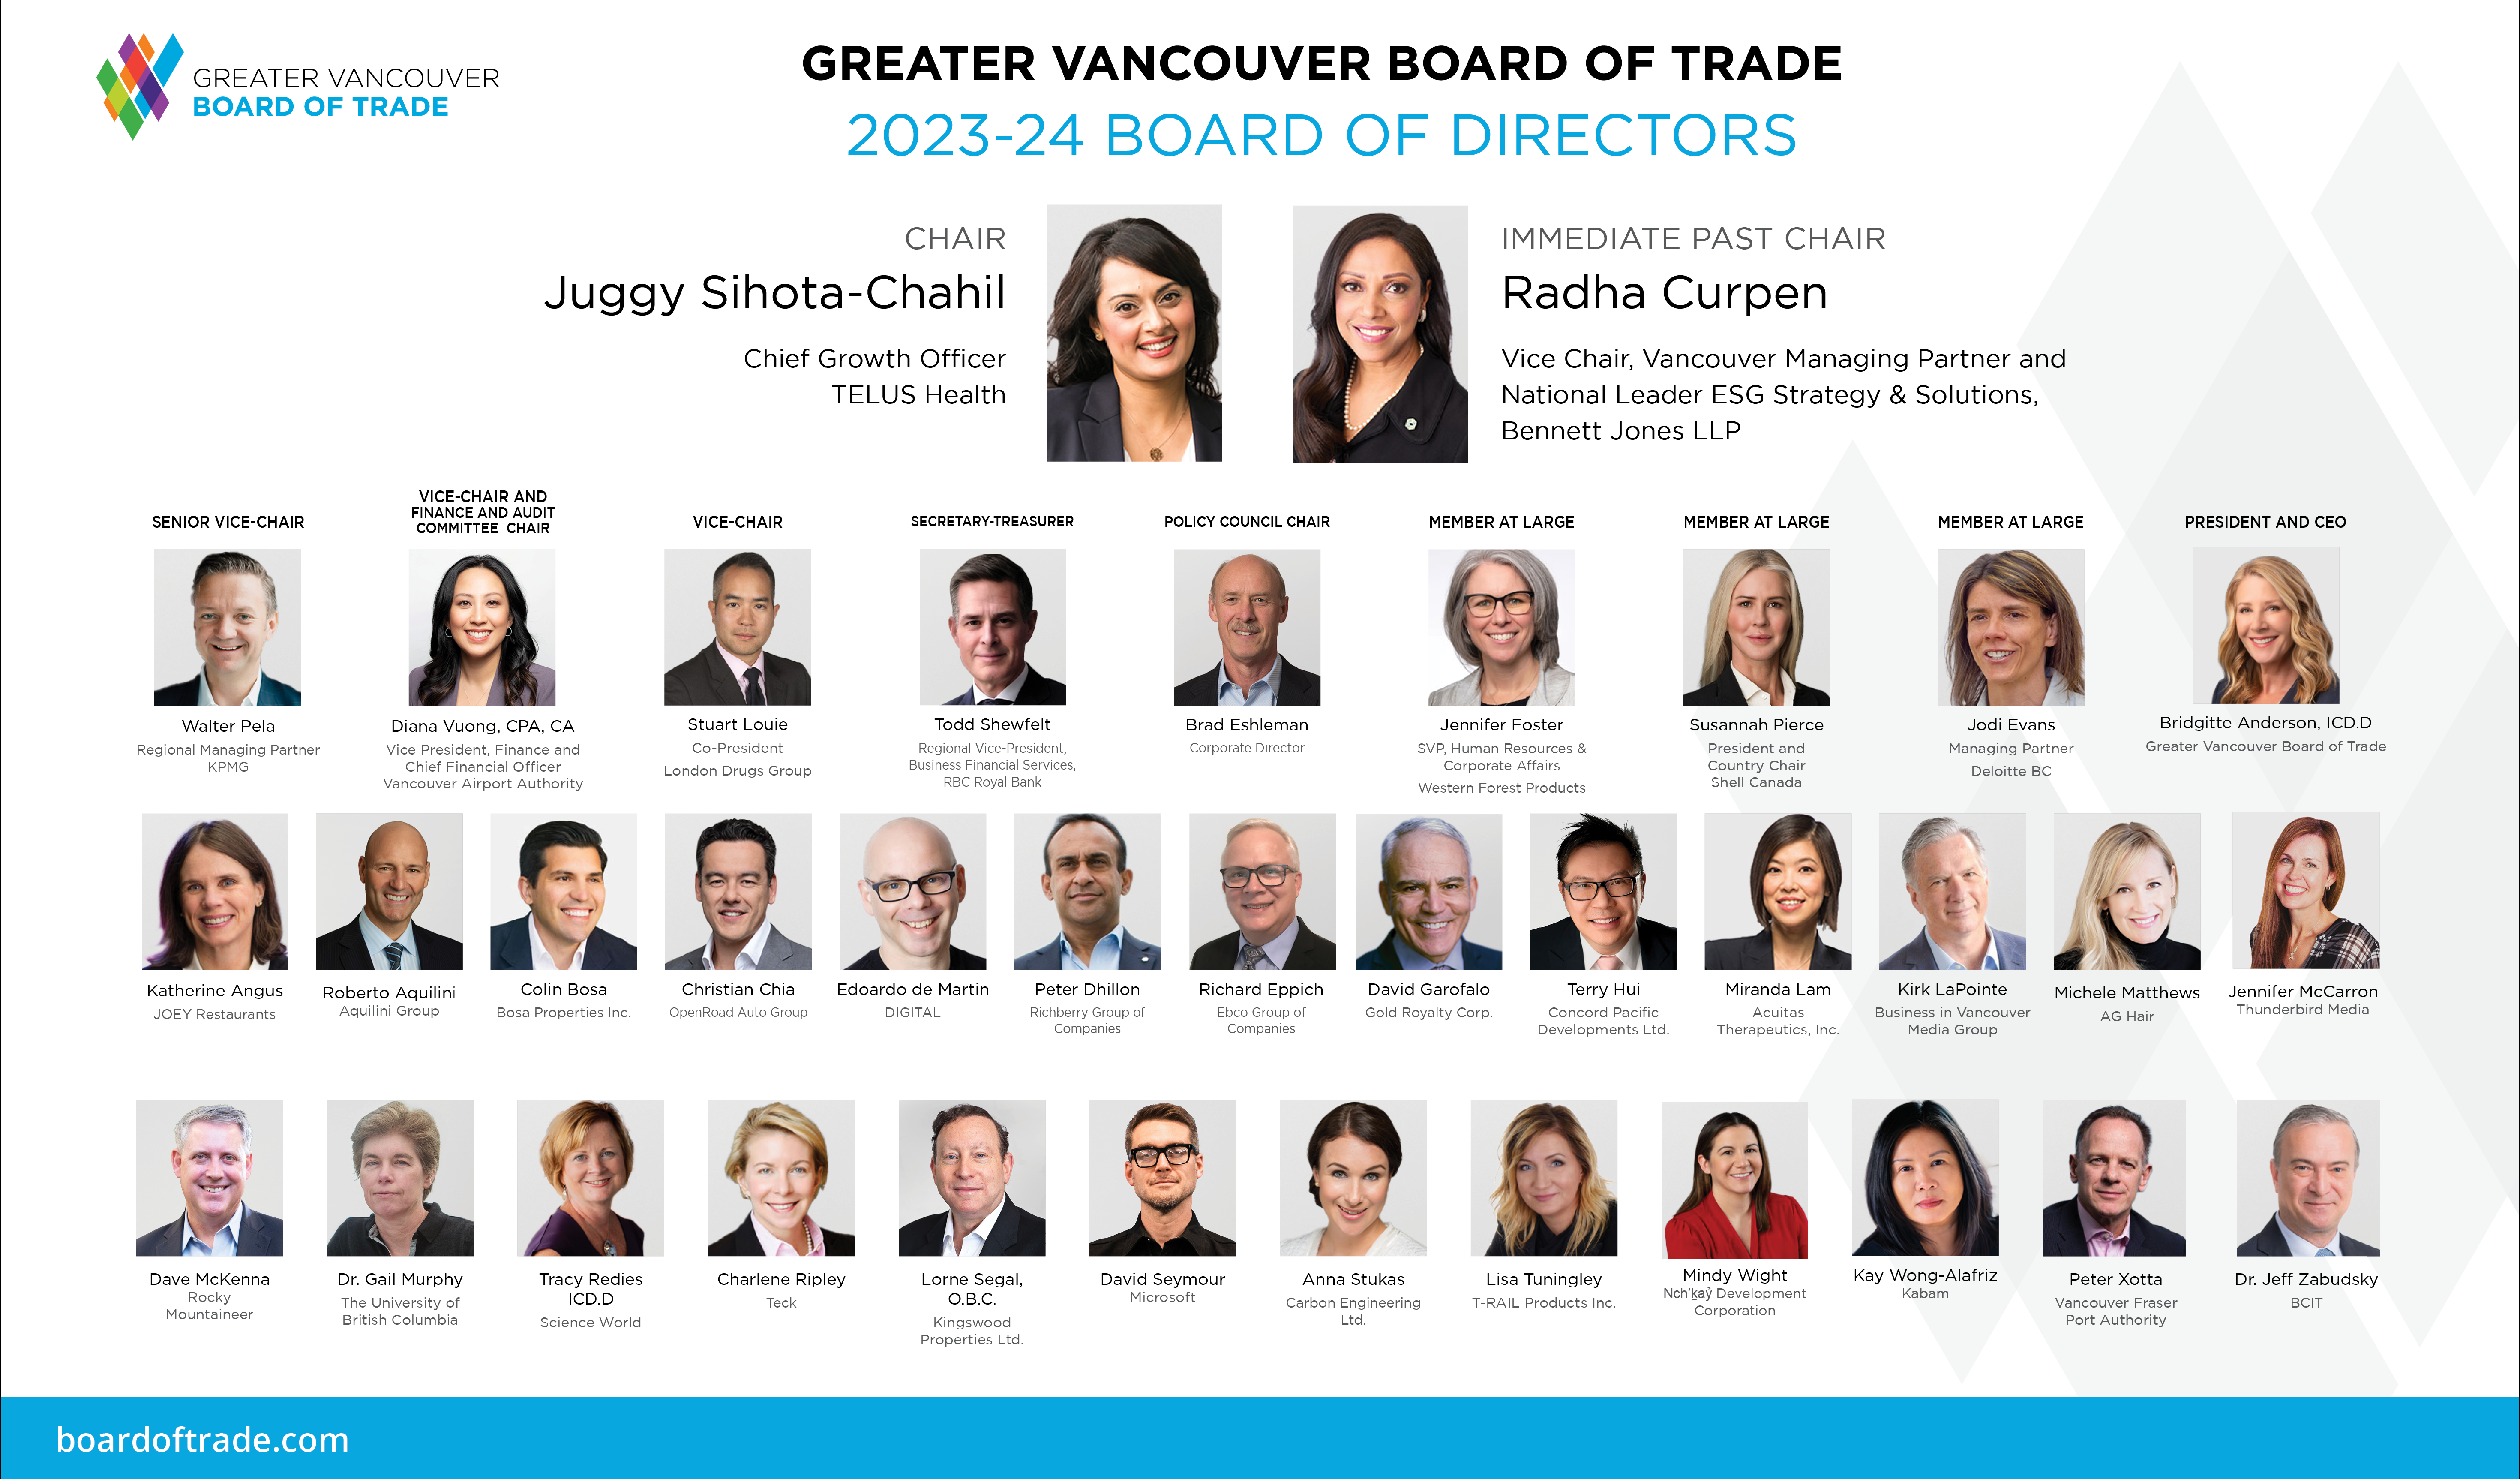 The Greater Vancouver Board of Trade Board of Directors.